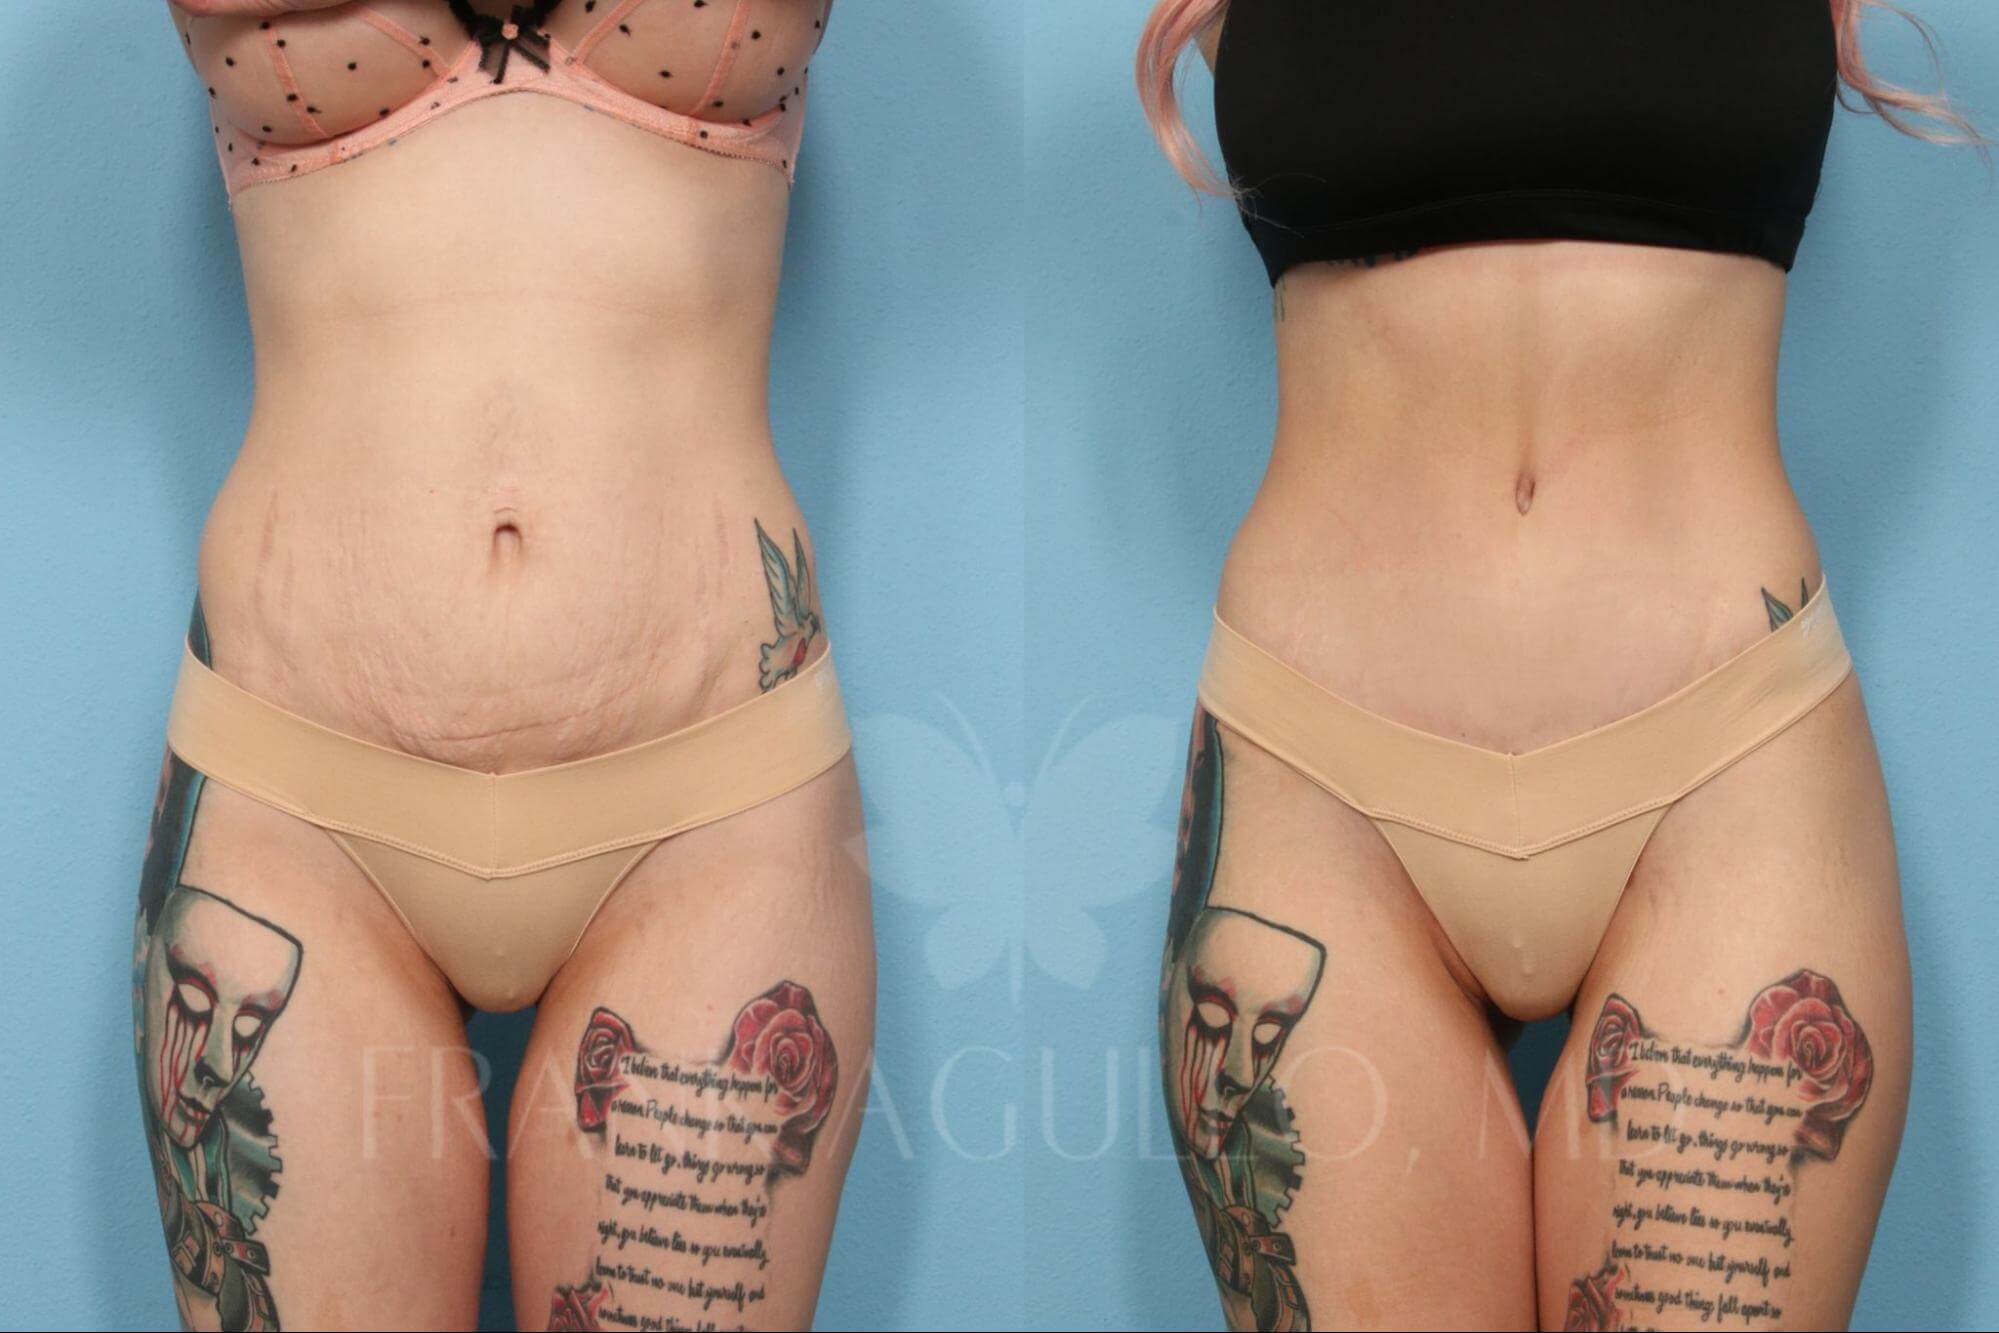 Different Types Of Tummy Tuck: Which Is The Right One For You?